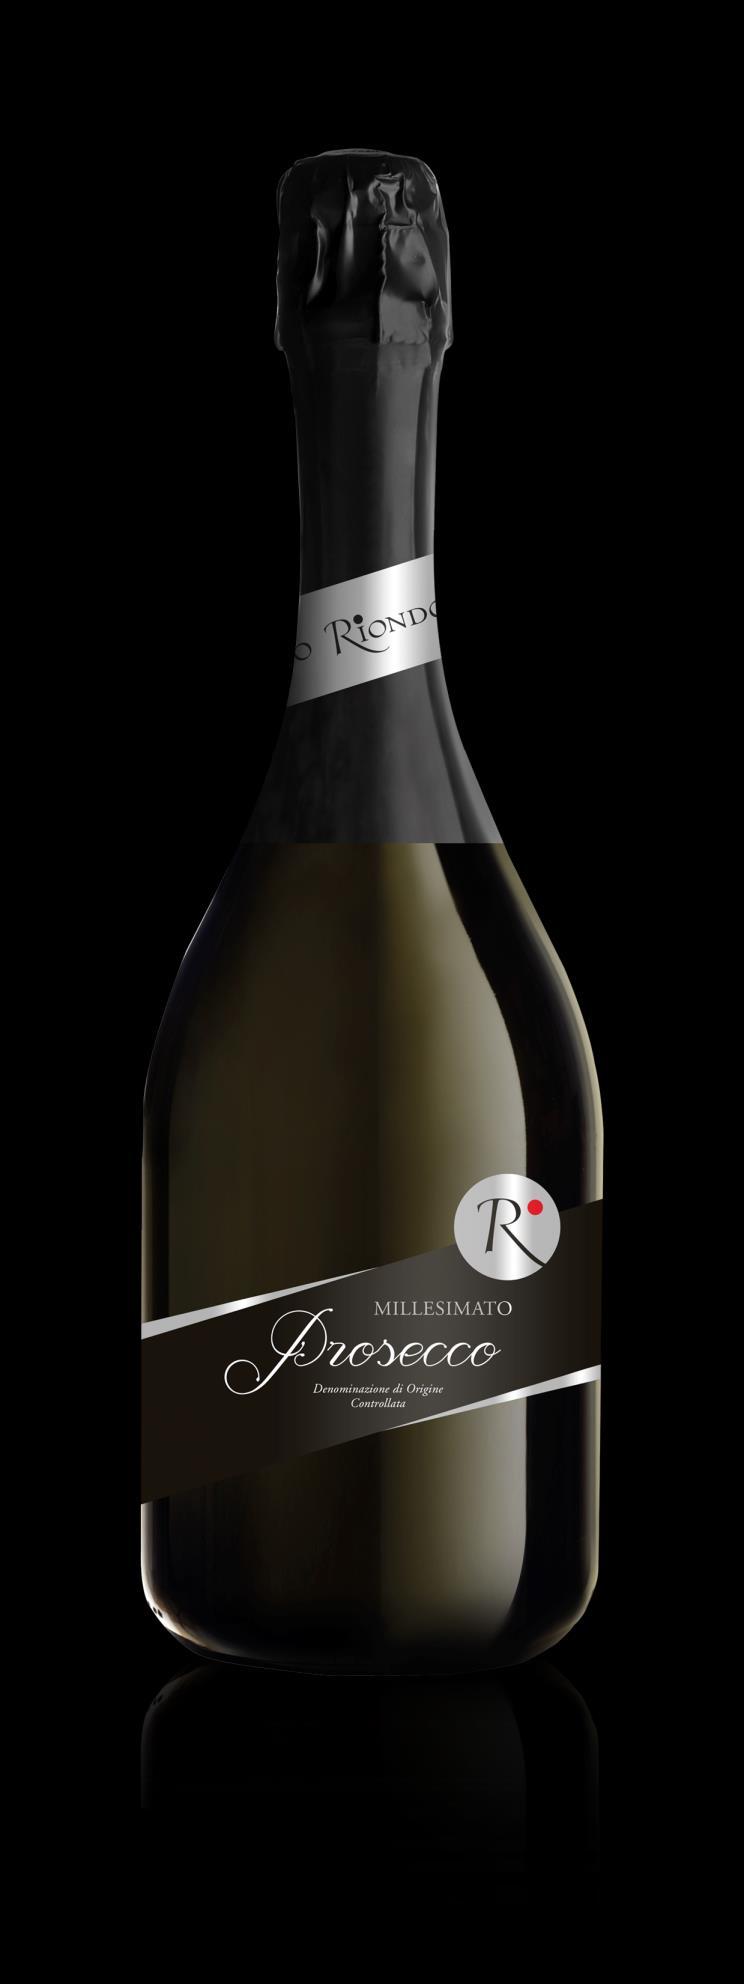 Millesimato Prosecco Sparkling, Extra Dry 11,5% vol 14 g/liter 750-1500ml 6-8 C Cold maceration of the grapes, natural